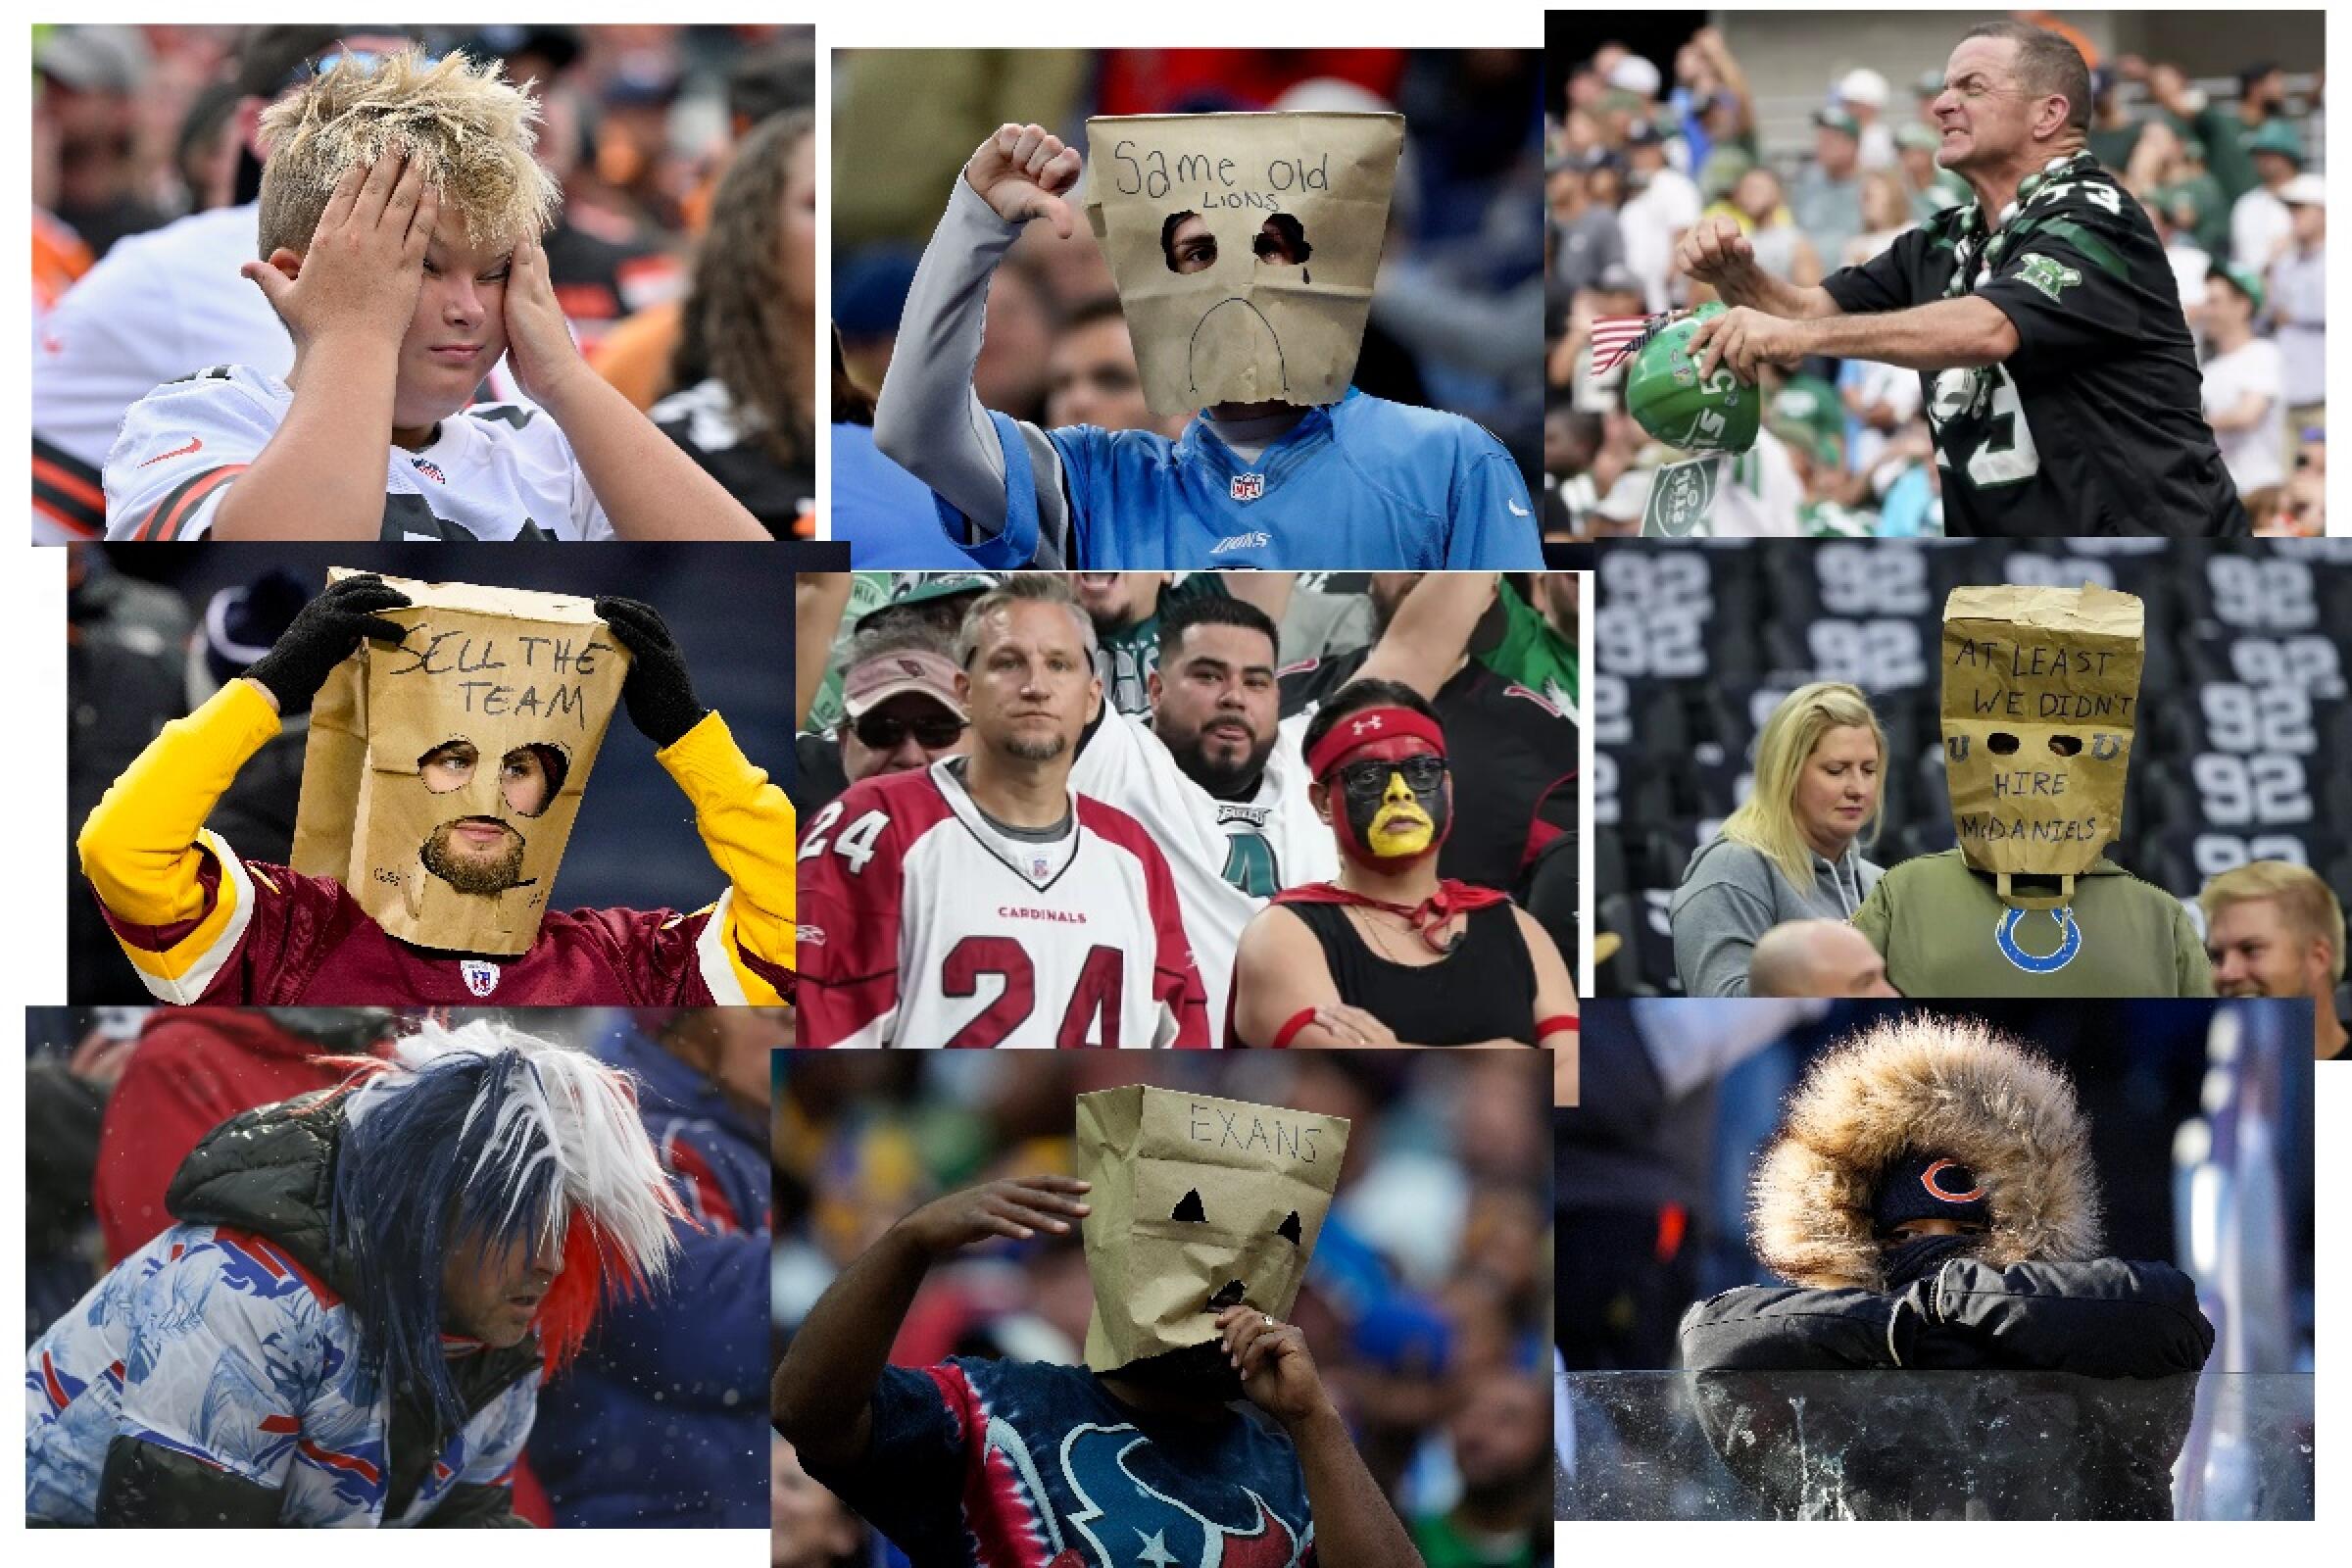 nfl fanbases ranked